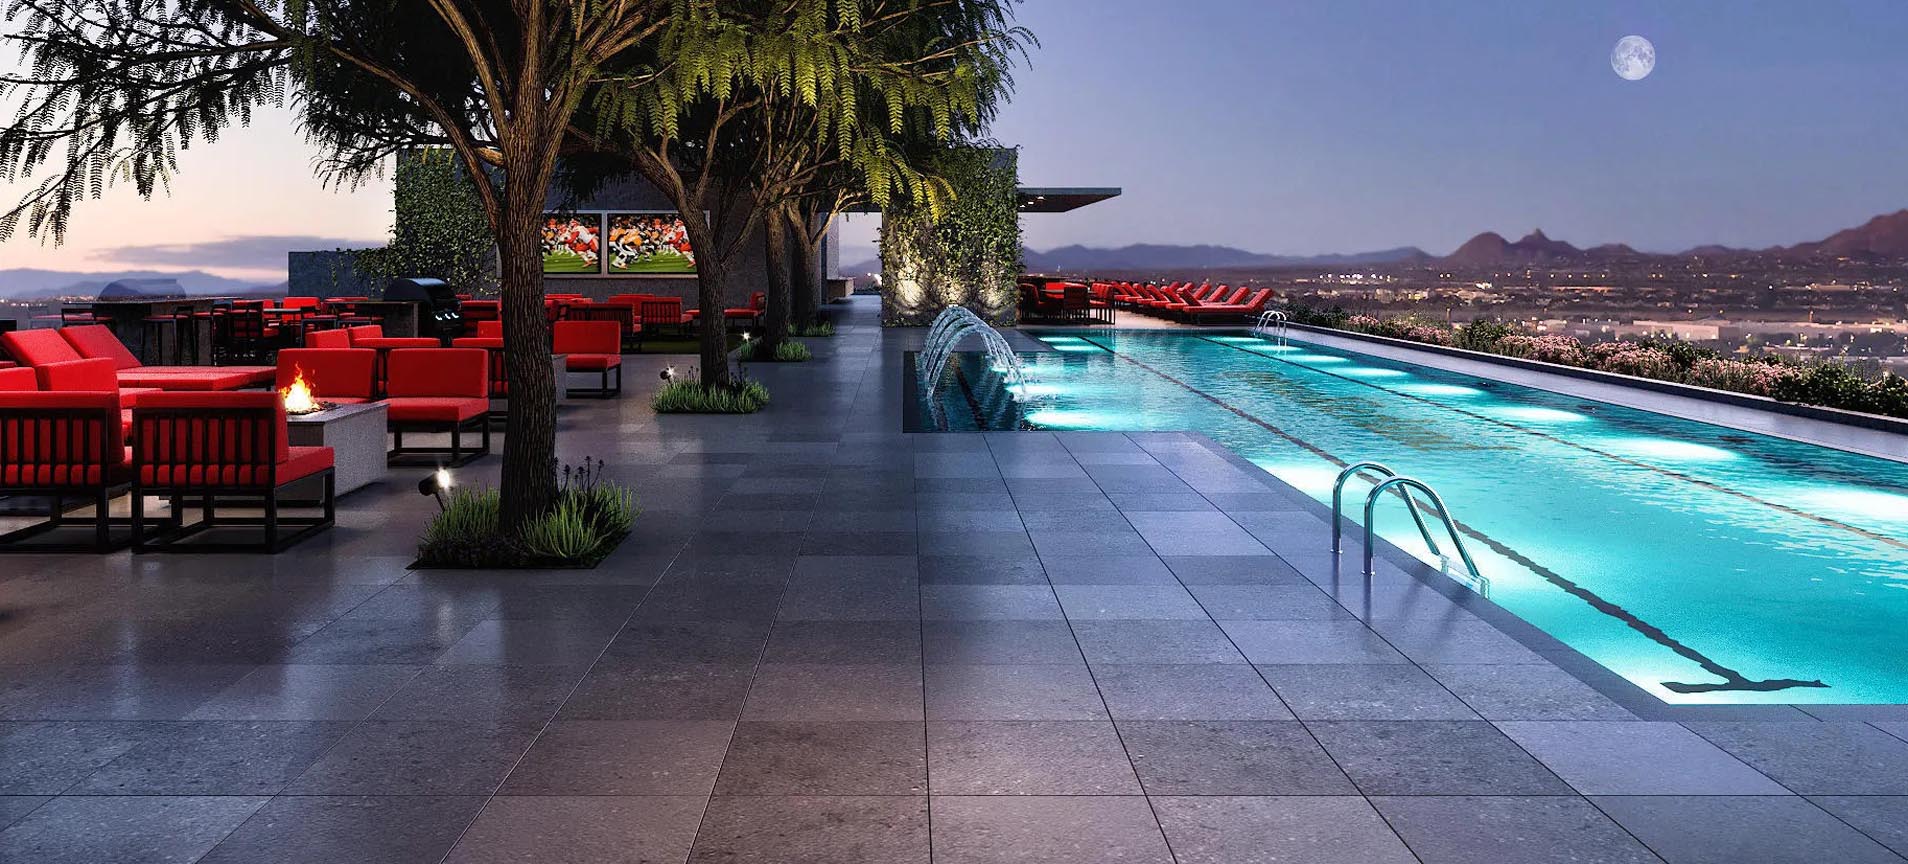 3 Things to Know When Considering Pool Coping Tiles